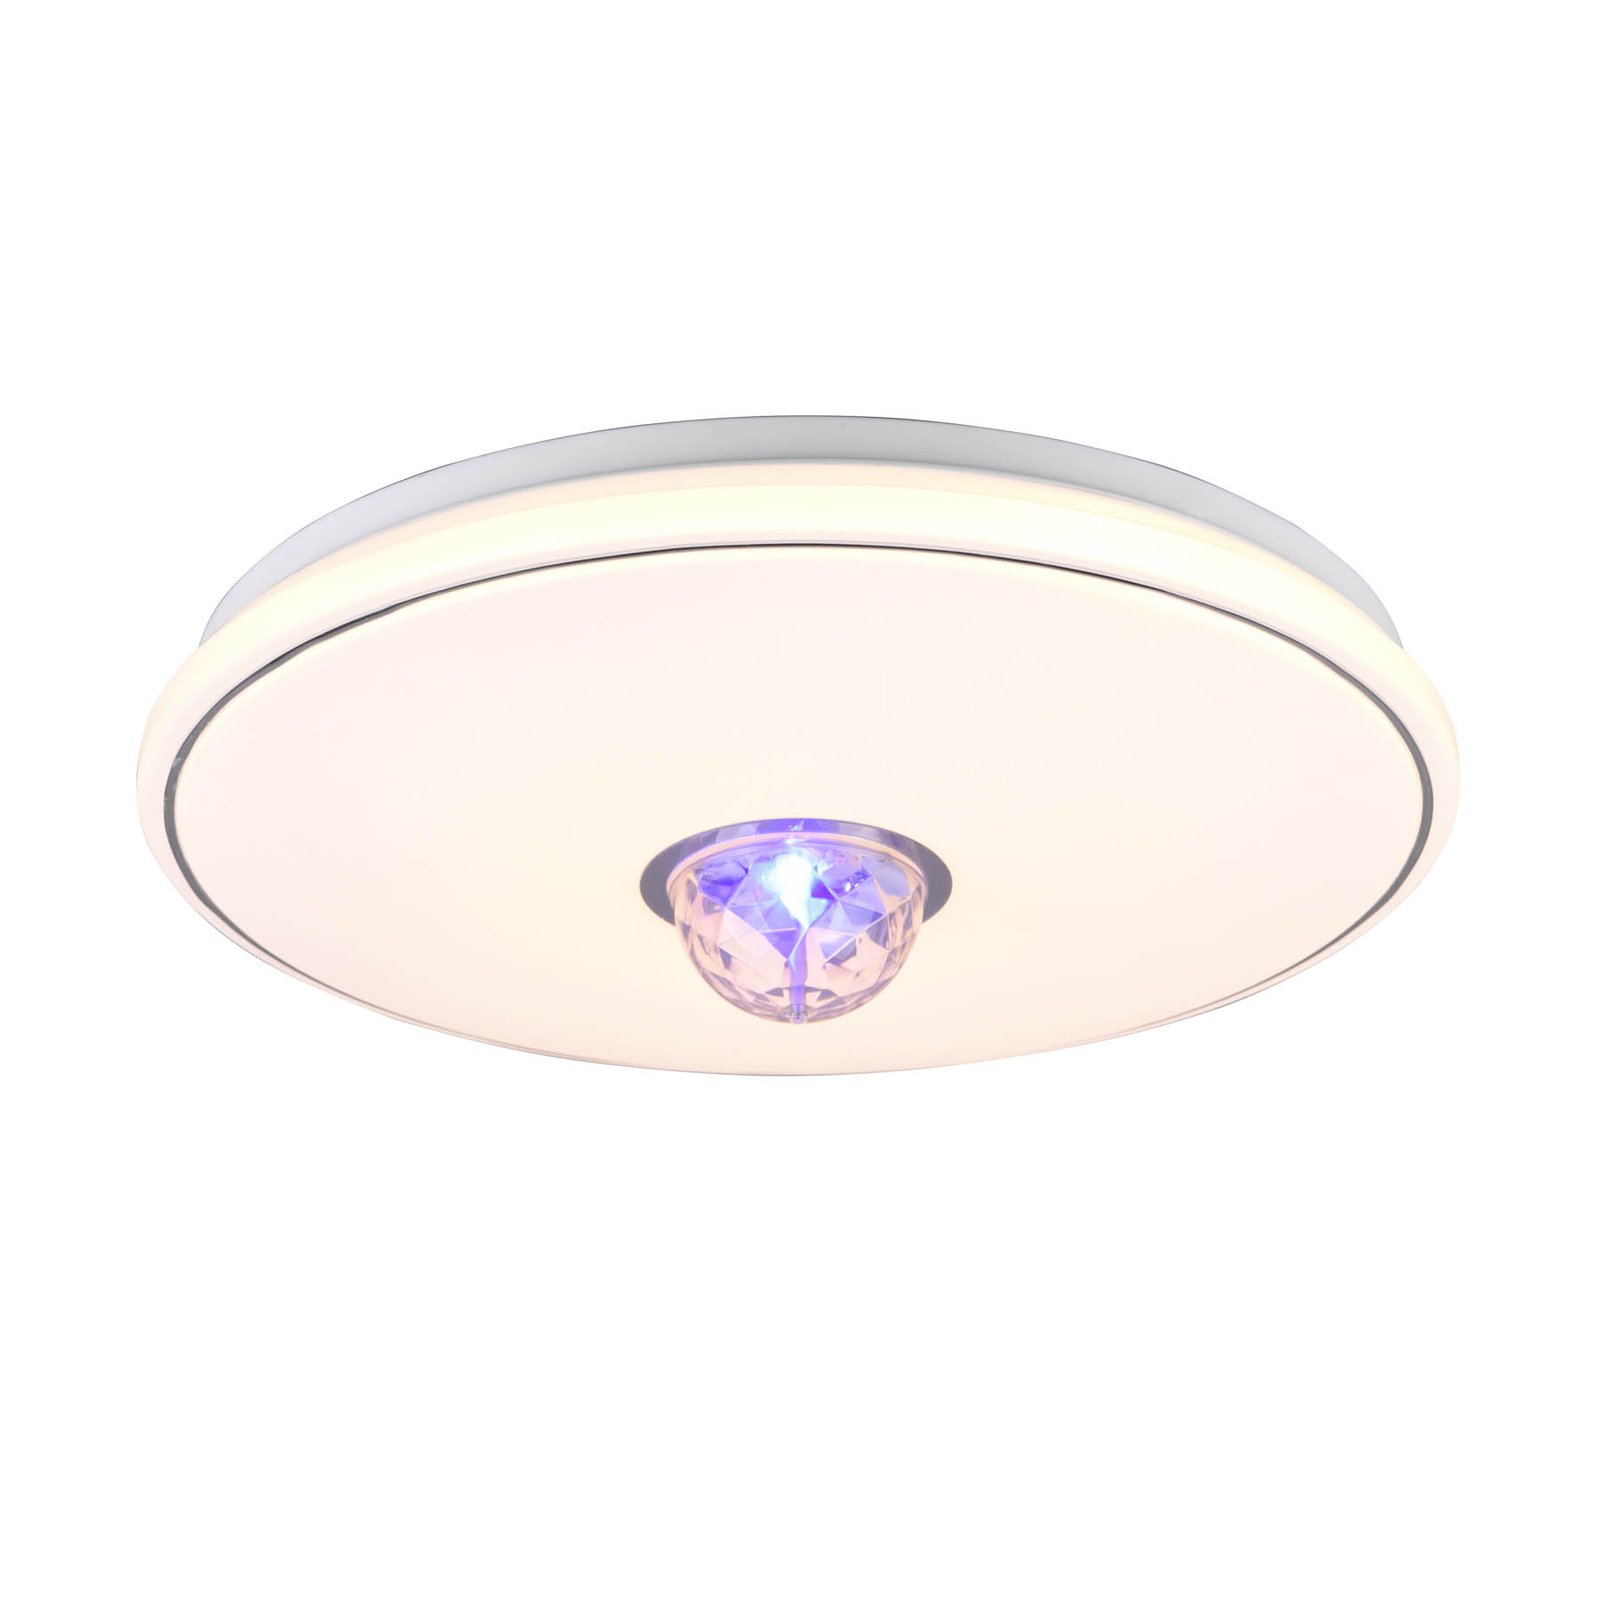 Rave LED ceiling lamp, remote control dimmable RGB